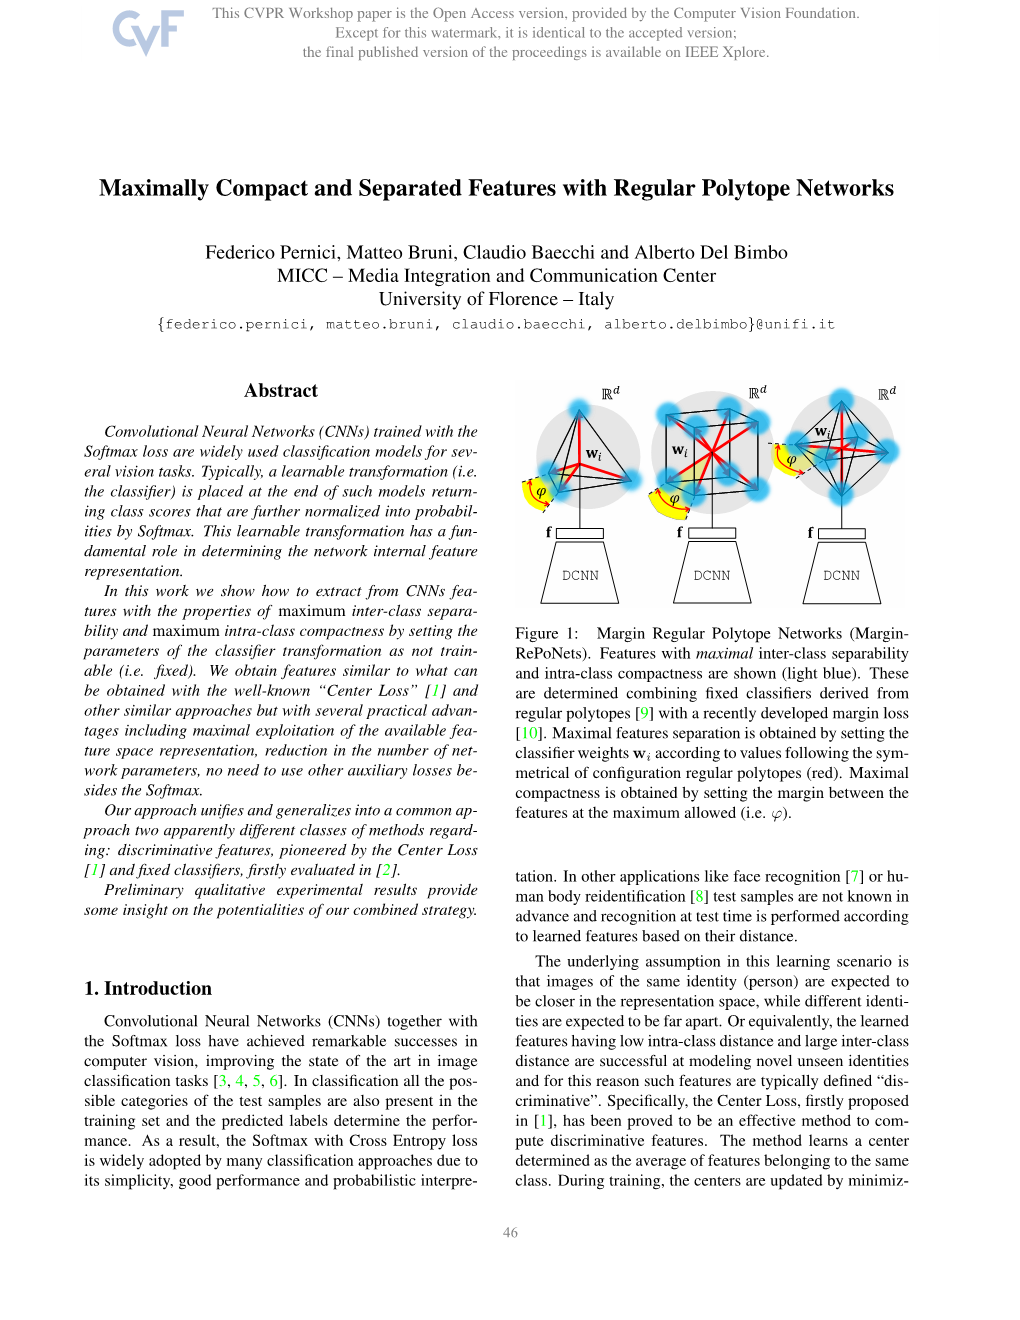 Maximally Compact and Separated Features with Regular Polytope Networks